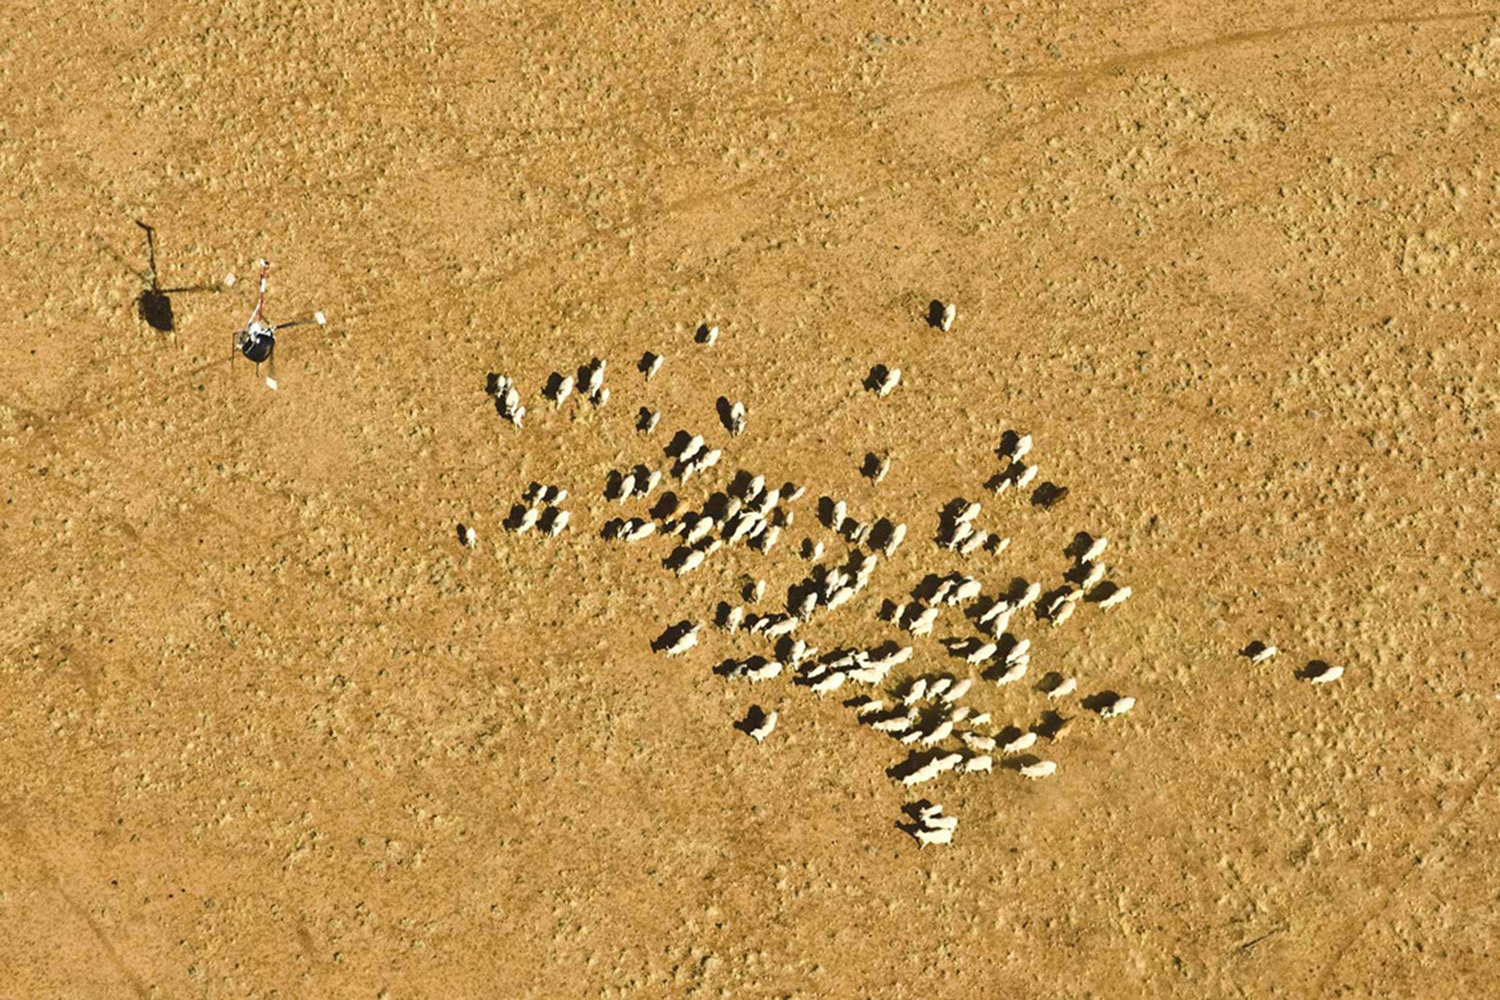 image of AARONTAIT COPYRIGHTED 2014 376 RURAL PHOTOGRAPHER FARM LIFE AGRICULTURE WOOL BEEF STOCKMAN MUSTER CATTLE FARM AUSTRALIAN AERIAL MUSTER